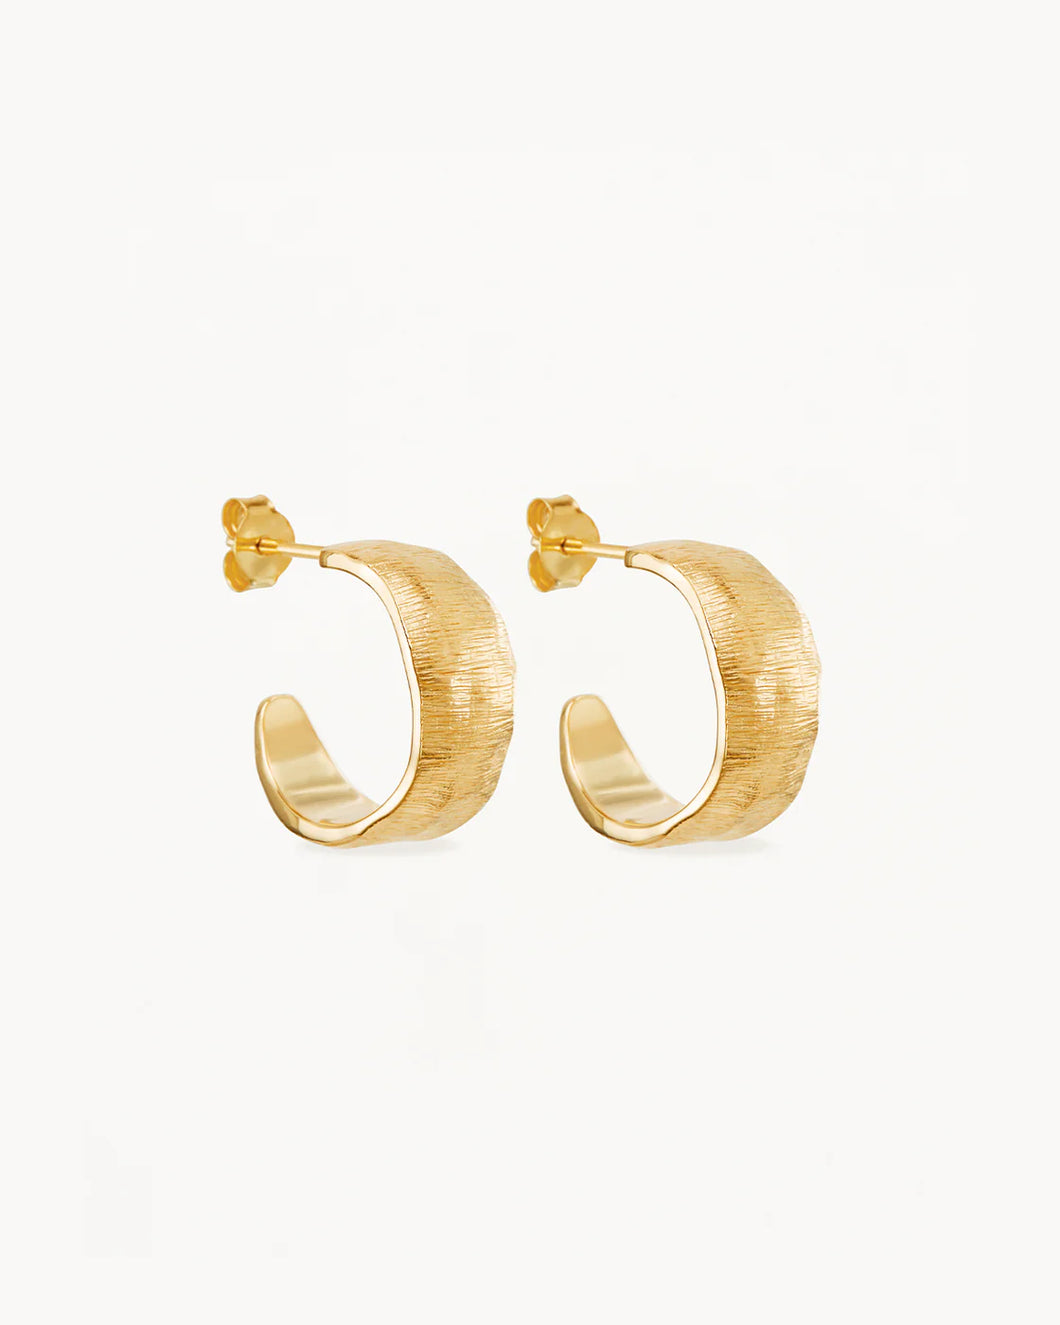 By Charlotte Woven Light Hoops